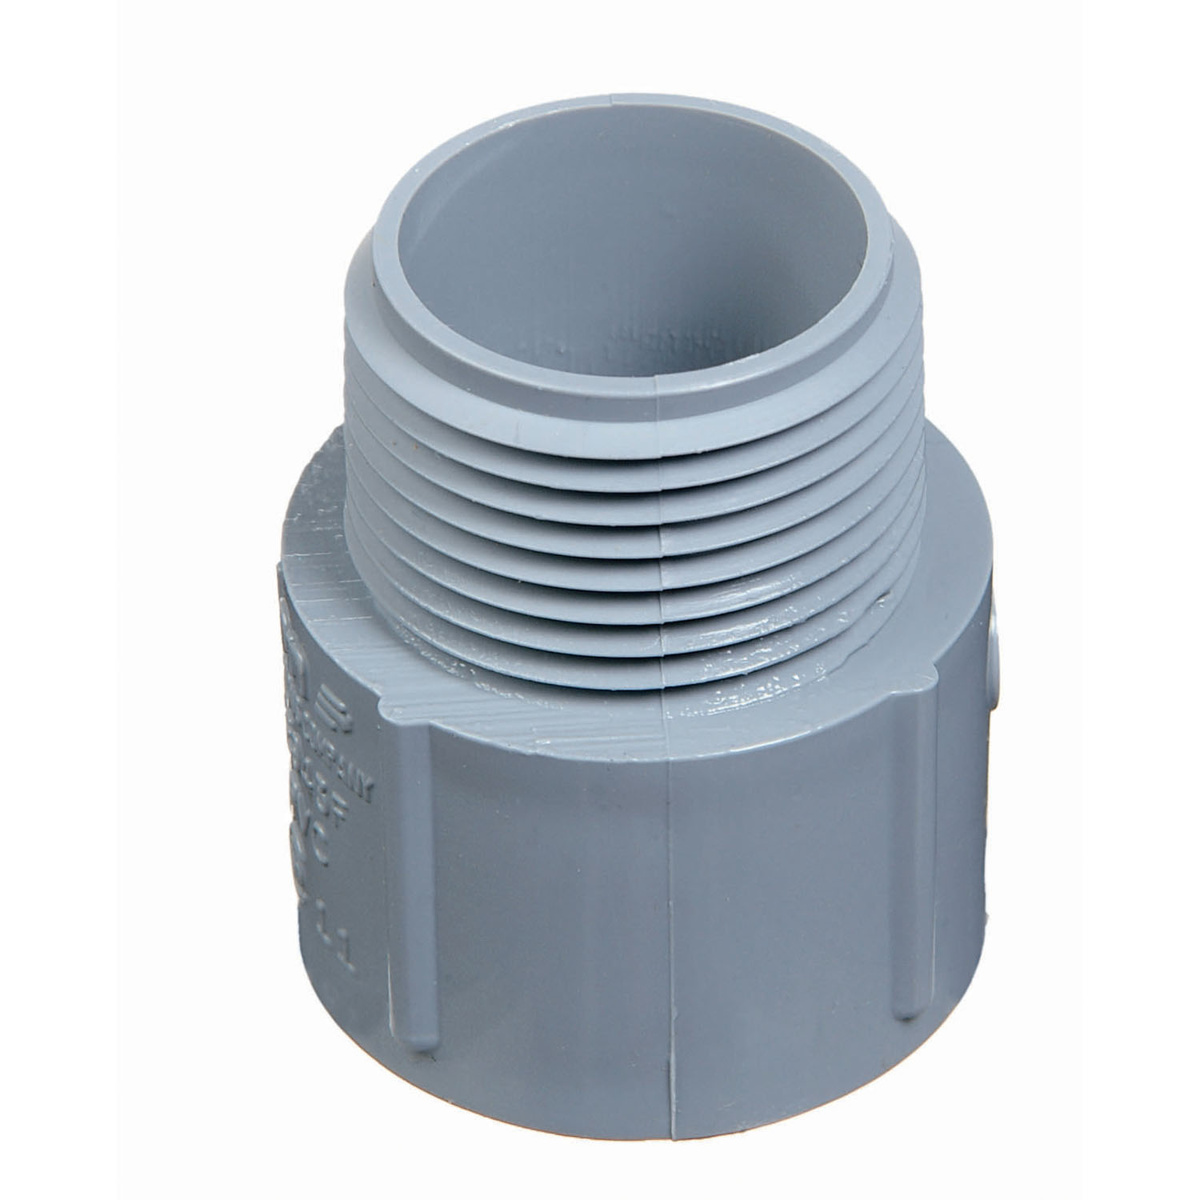 ABB Male Terminal Adapter PVC Sch 40 and 80 2 in Threaded Socket from GME Supply